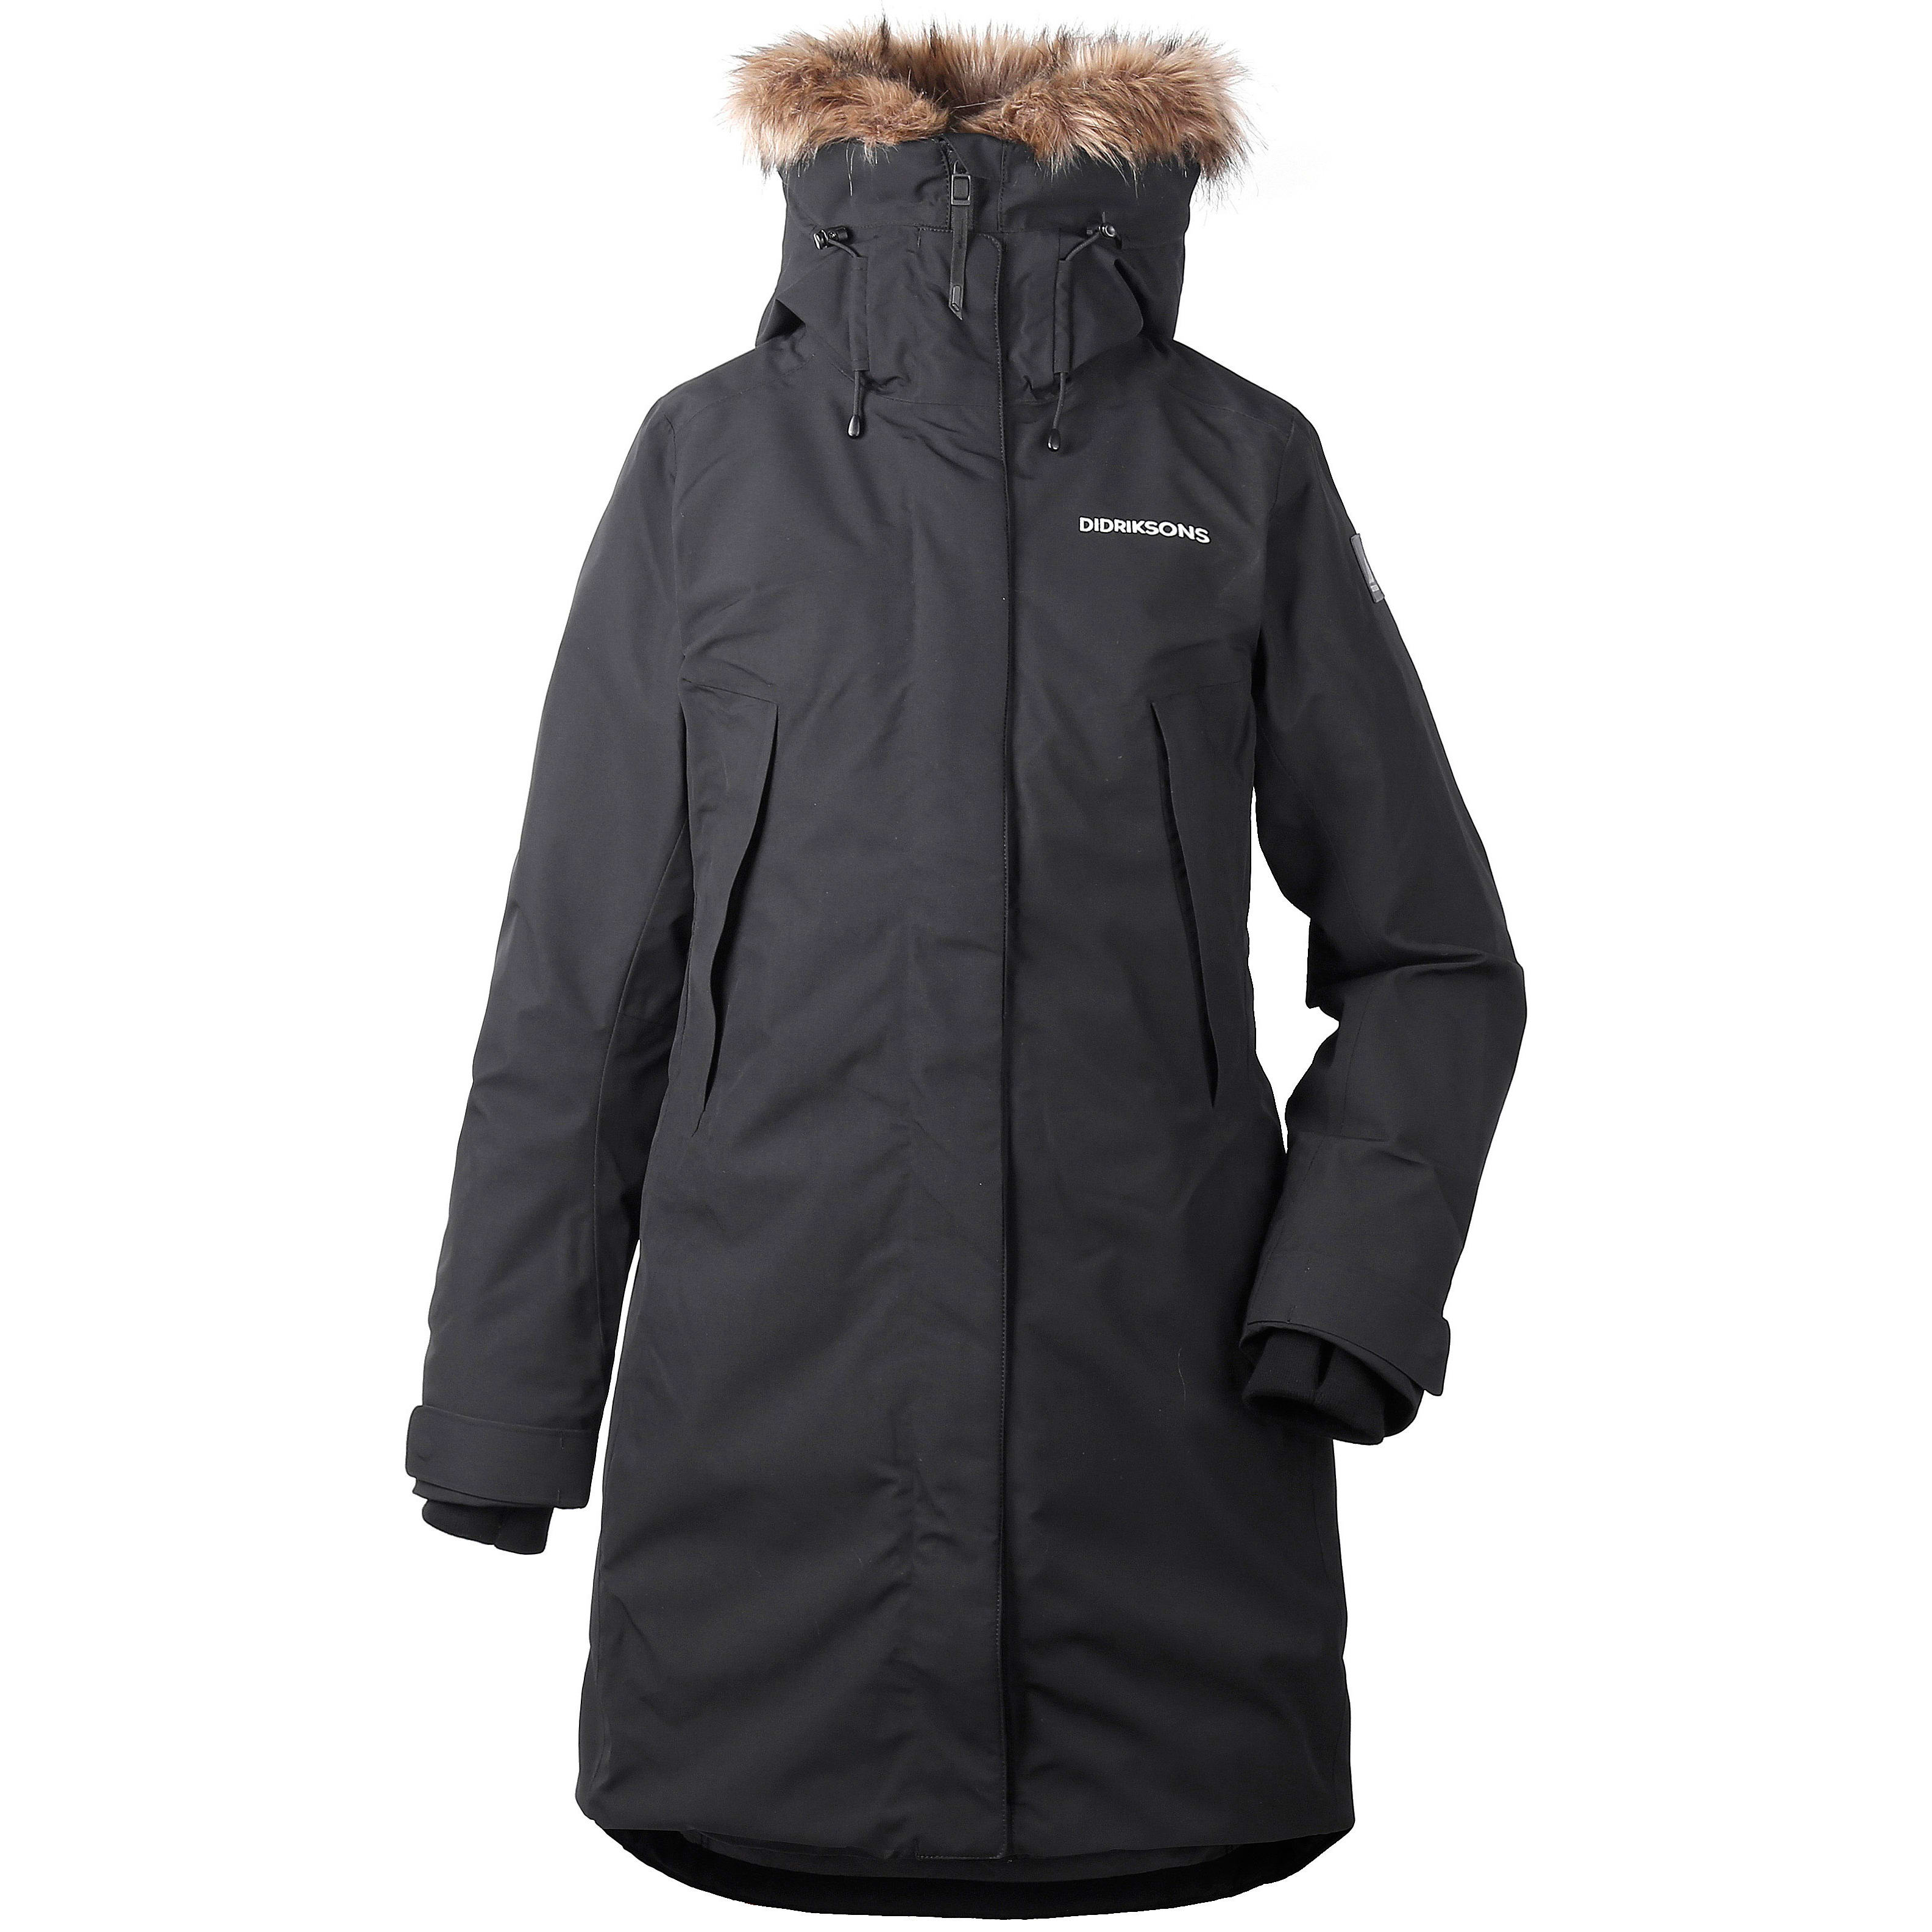 constante partitie Plaatsen Buy Didriksons Nadine Women's Parka from Outnorth